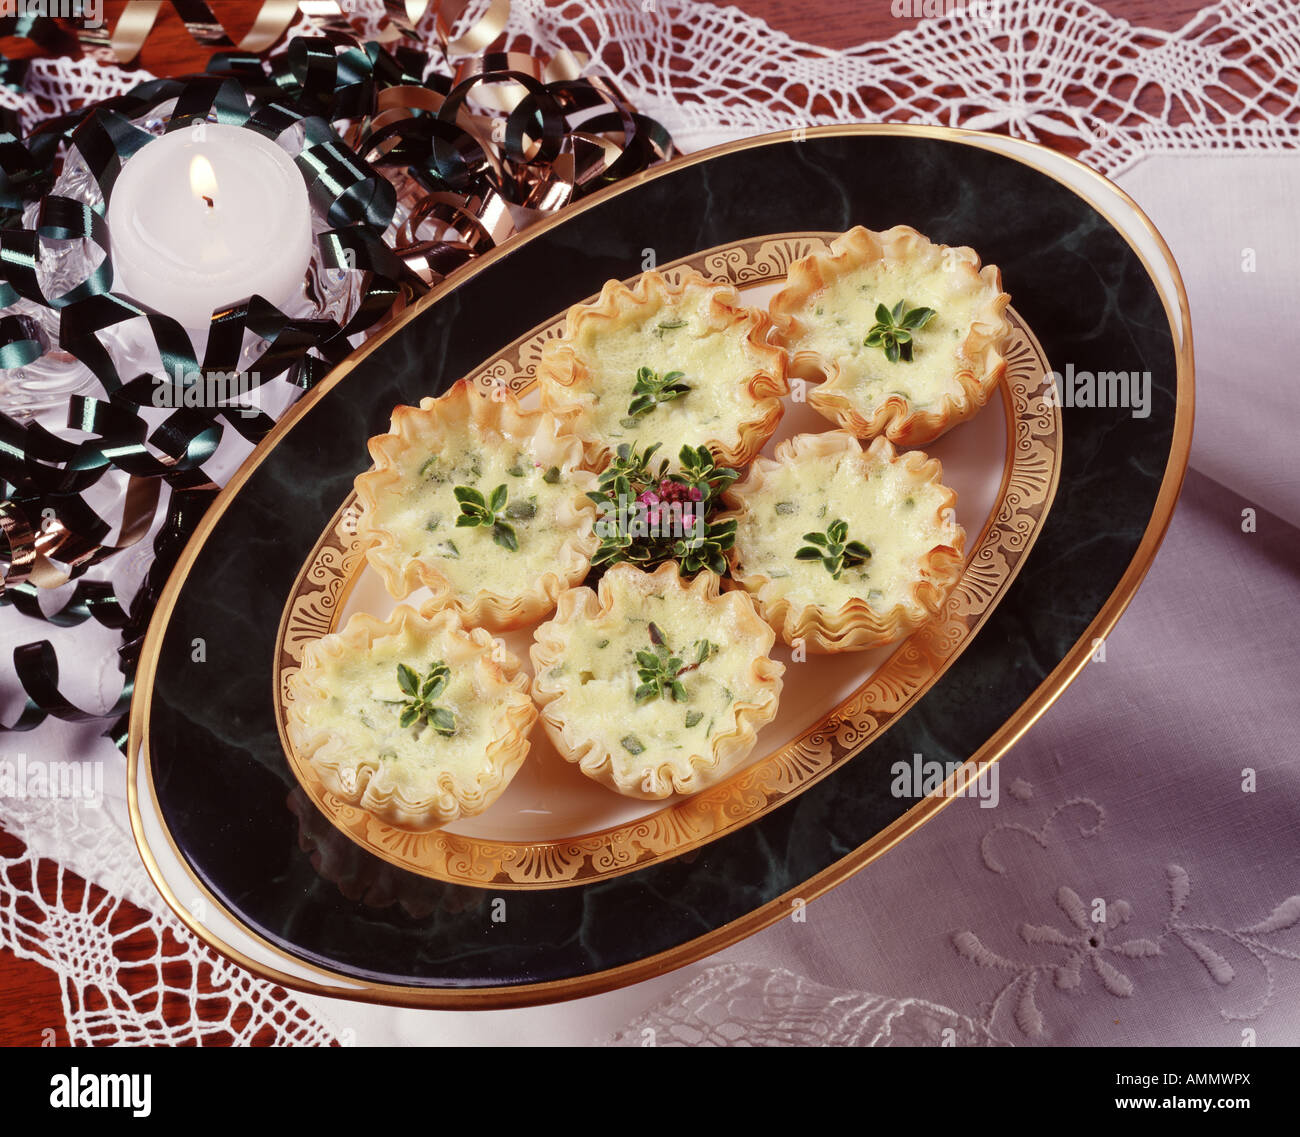 festive holiday party platter goat cheese spinach tarts Stock Photo